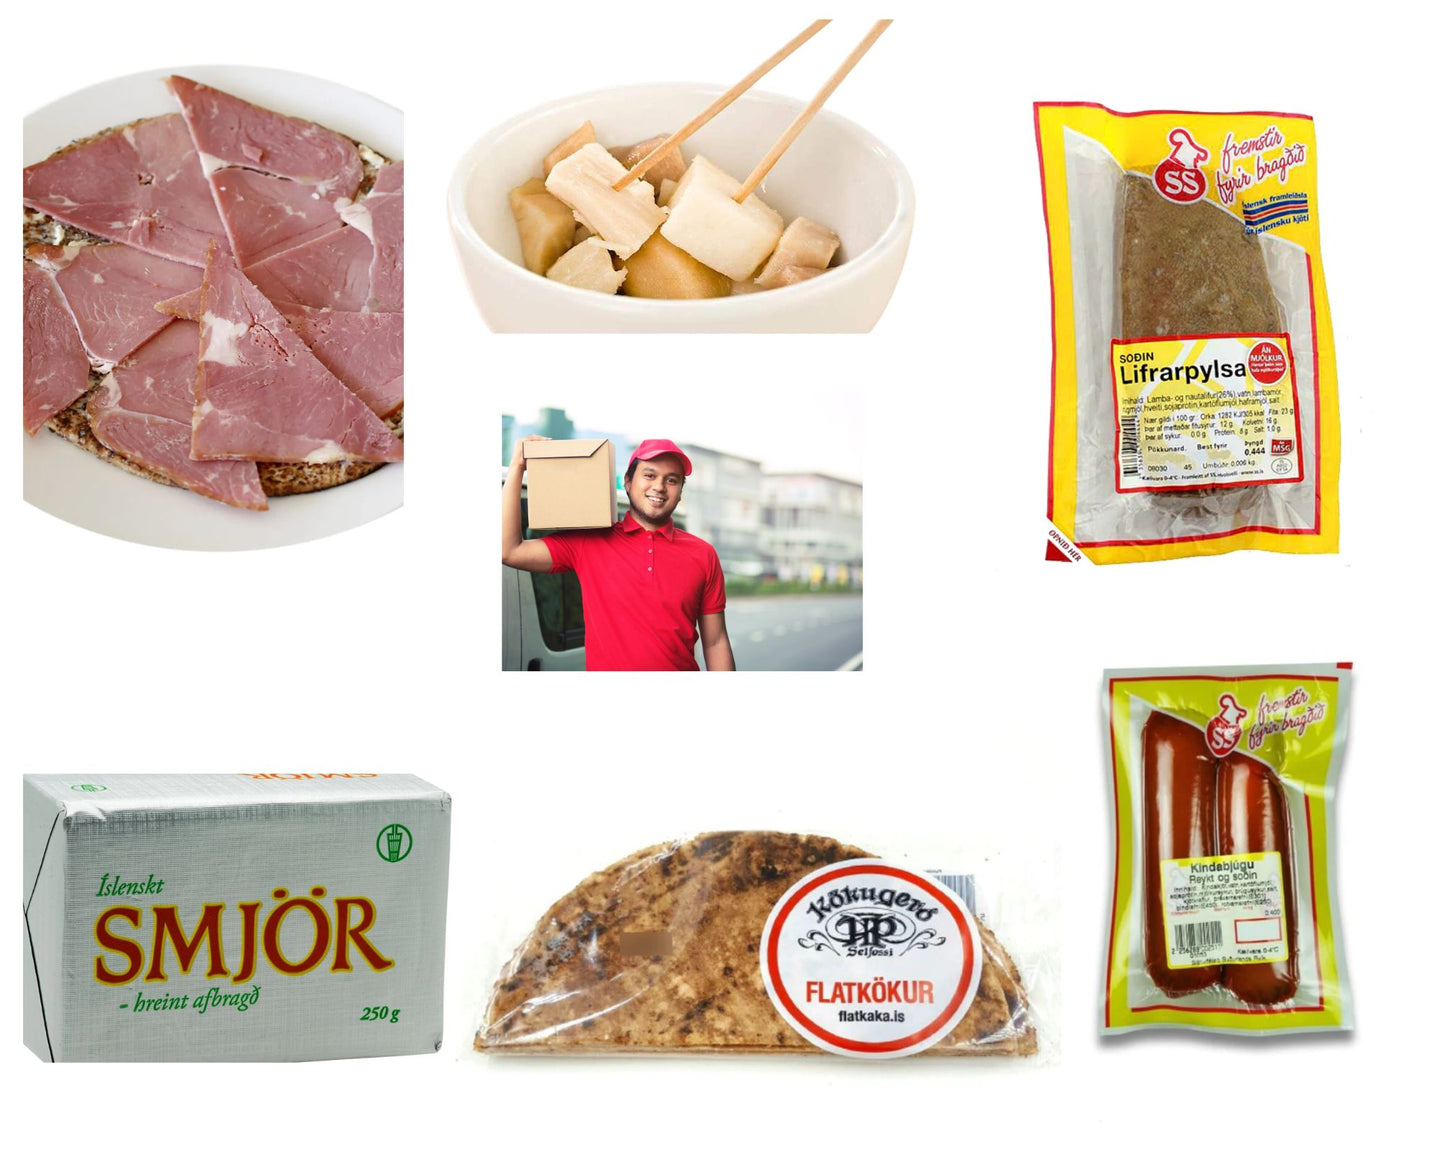 The traditional bundle mixes Smoked lamb sausage, Lamb liver sausage, Smoked Lamb slices, Shark bites, Icelandic butter, Dried fish fillets and two packs of HP Flatbread.  - Topiceland